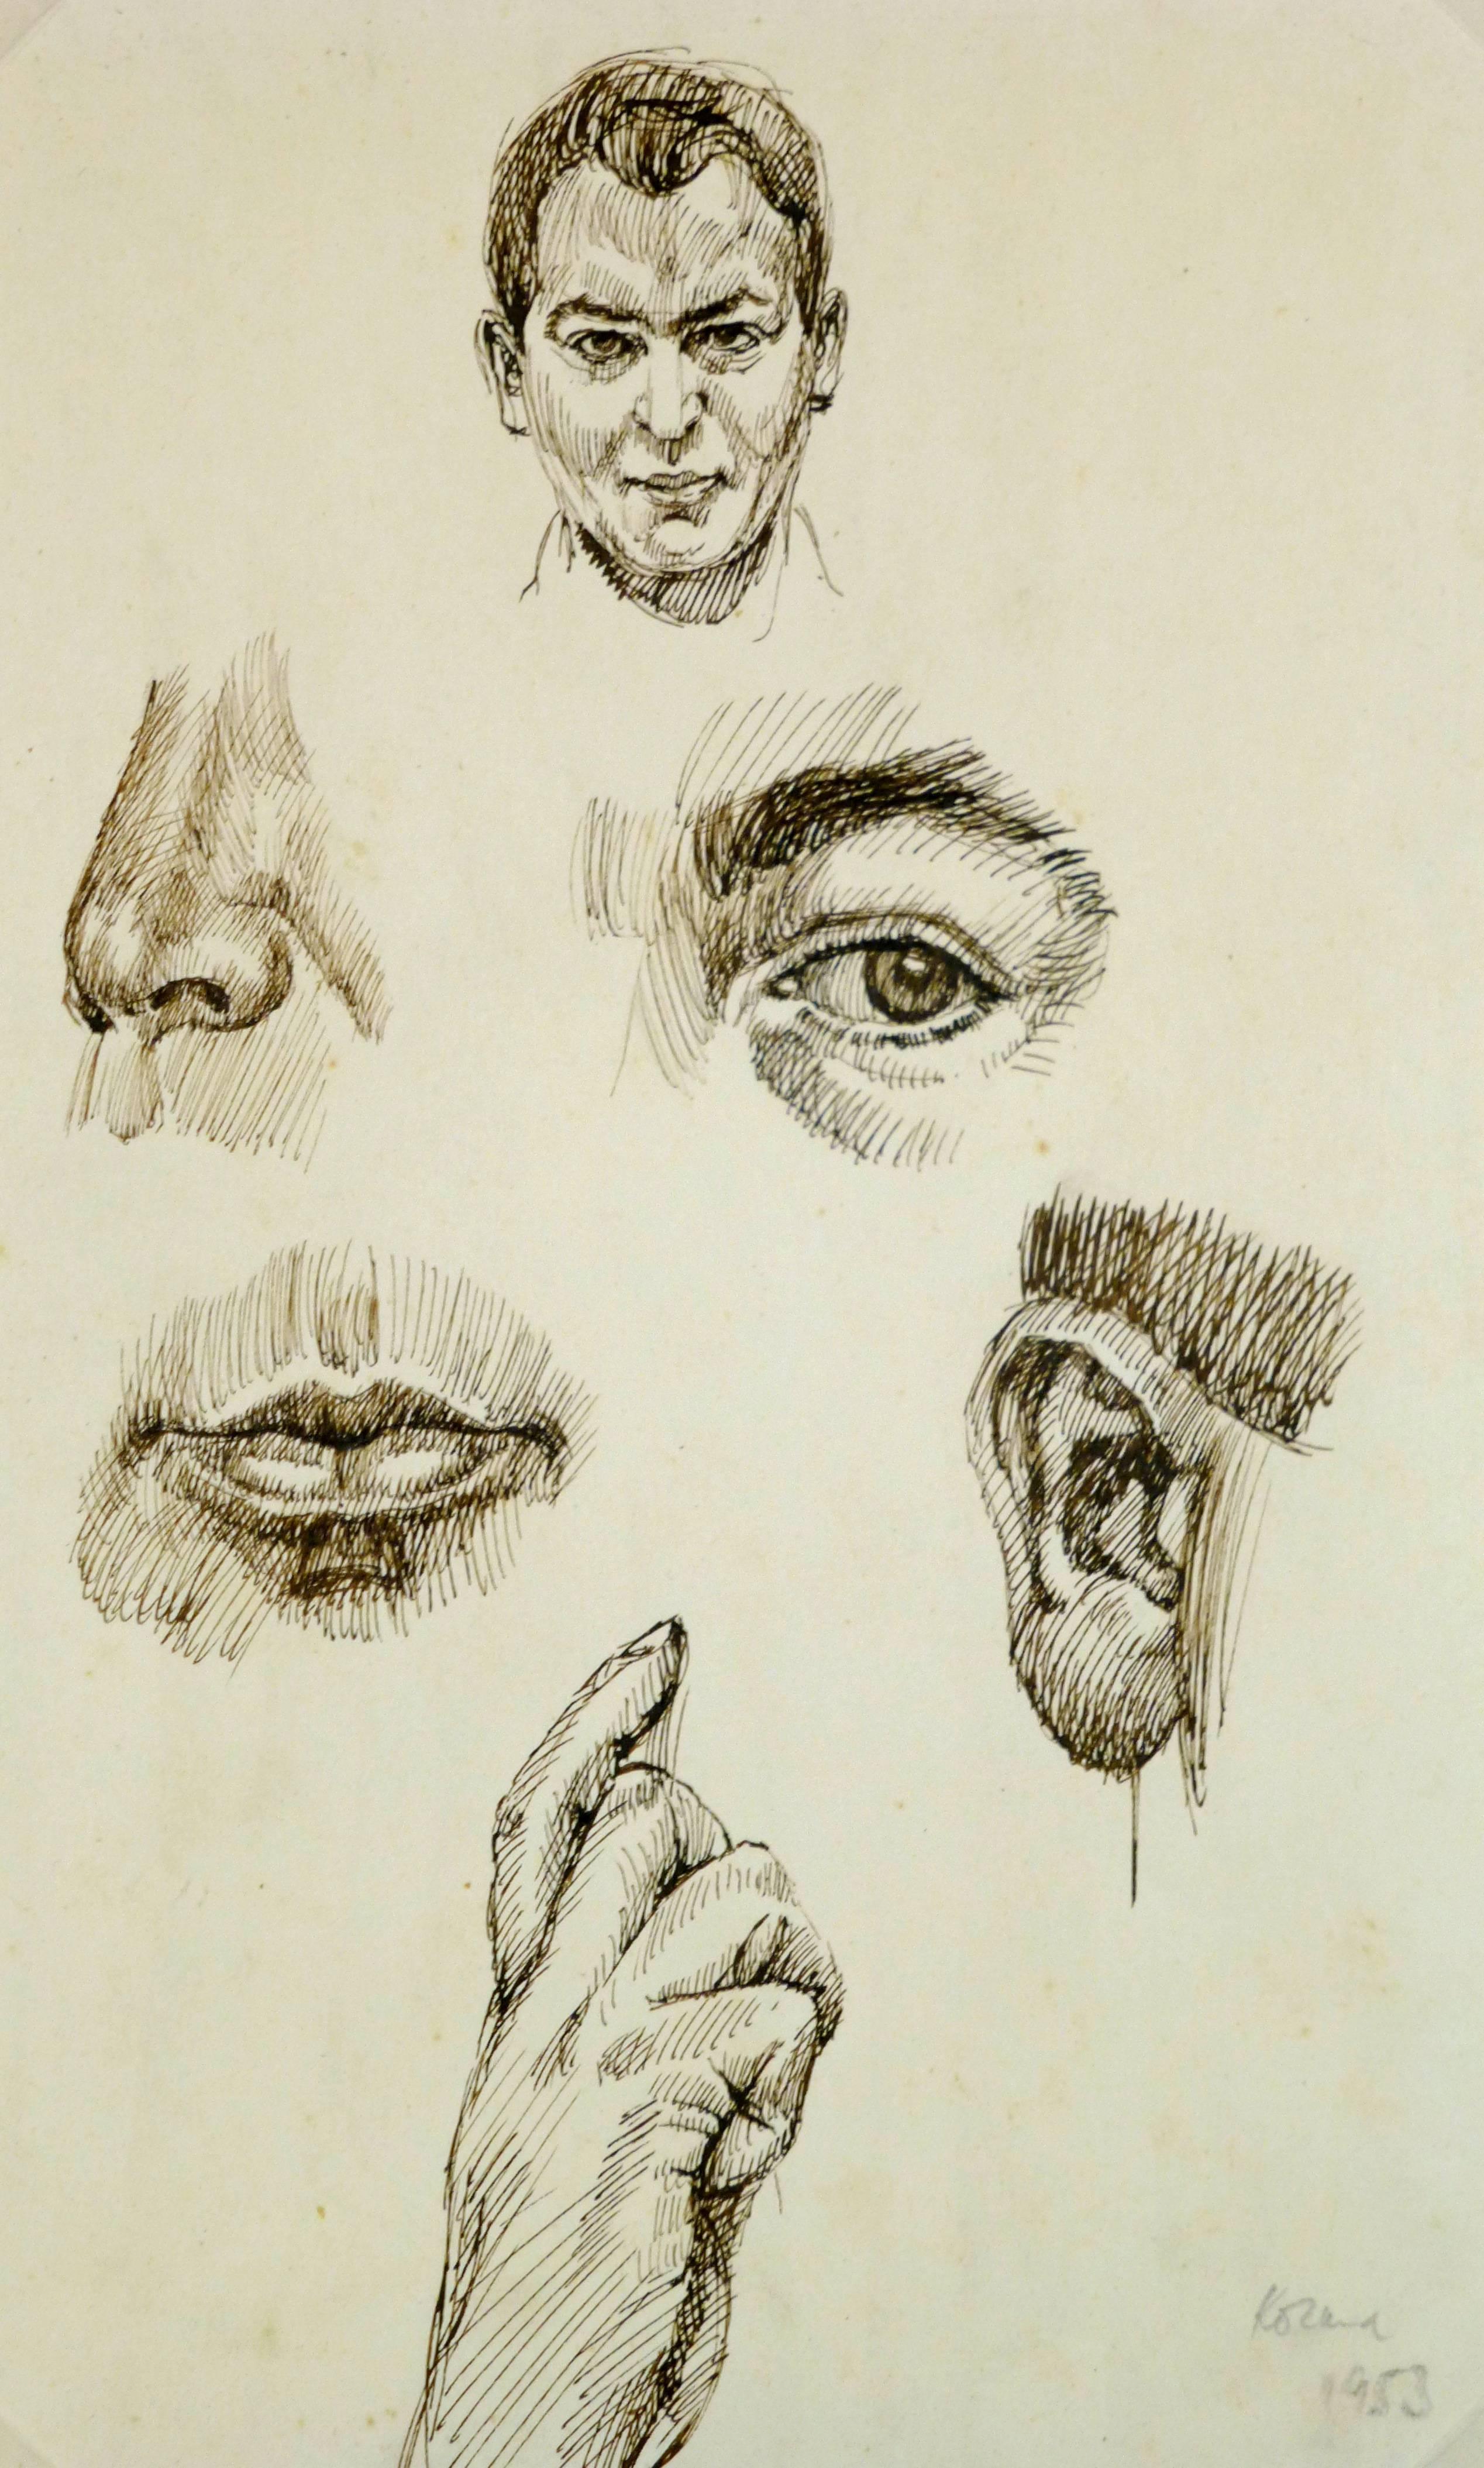 Unknown Figurative Art - Drawing of Facial Details